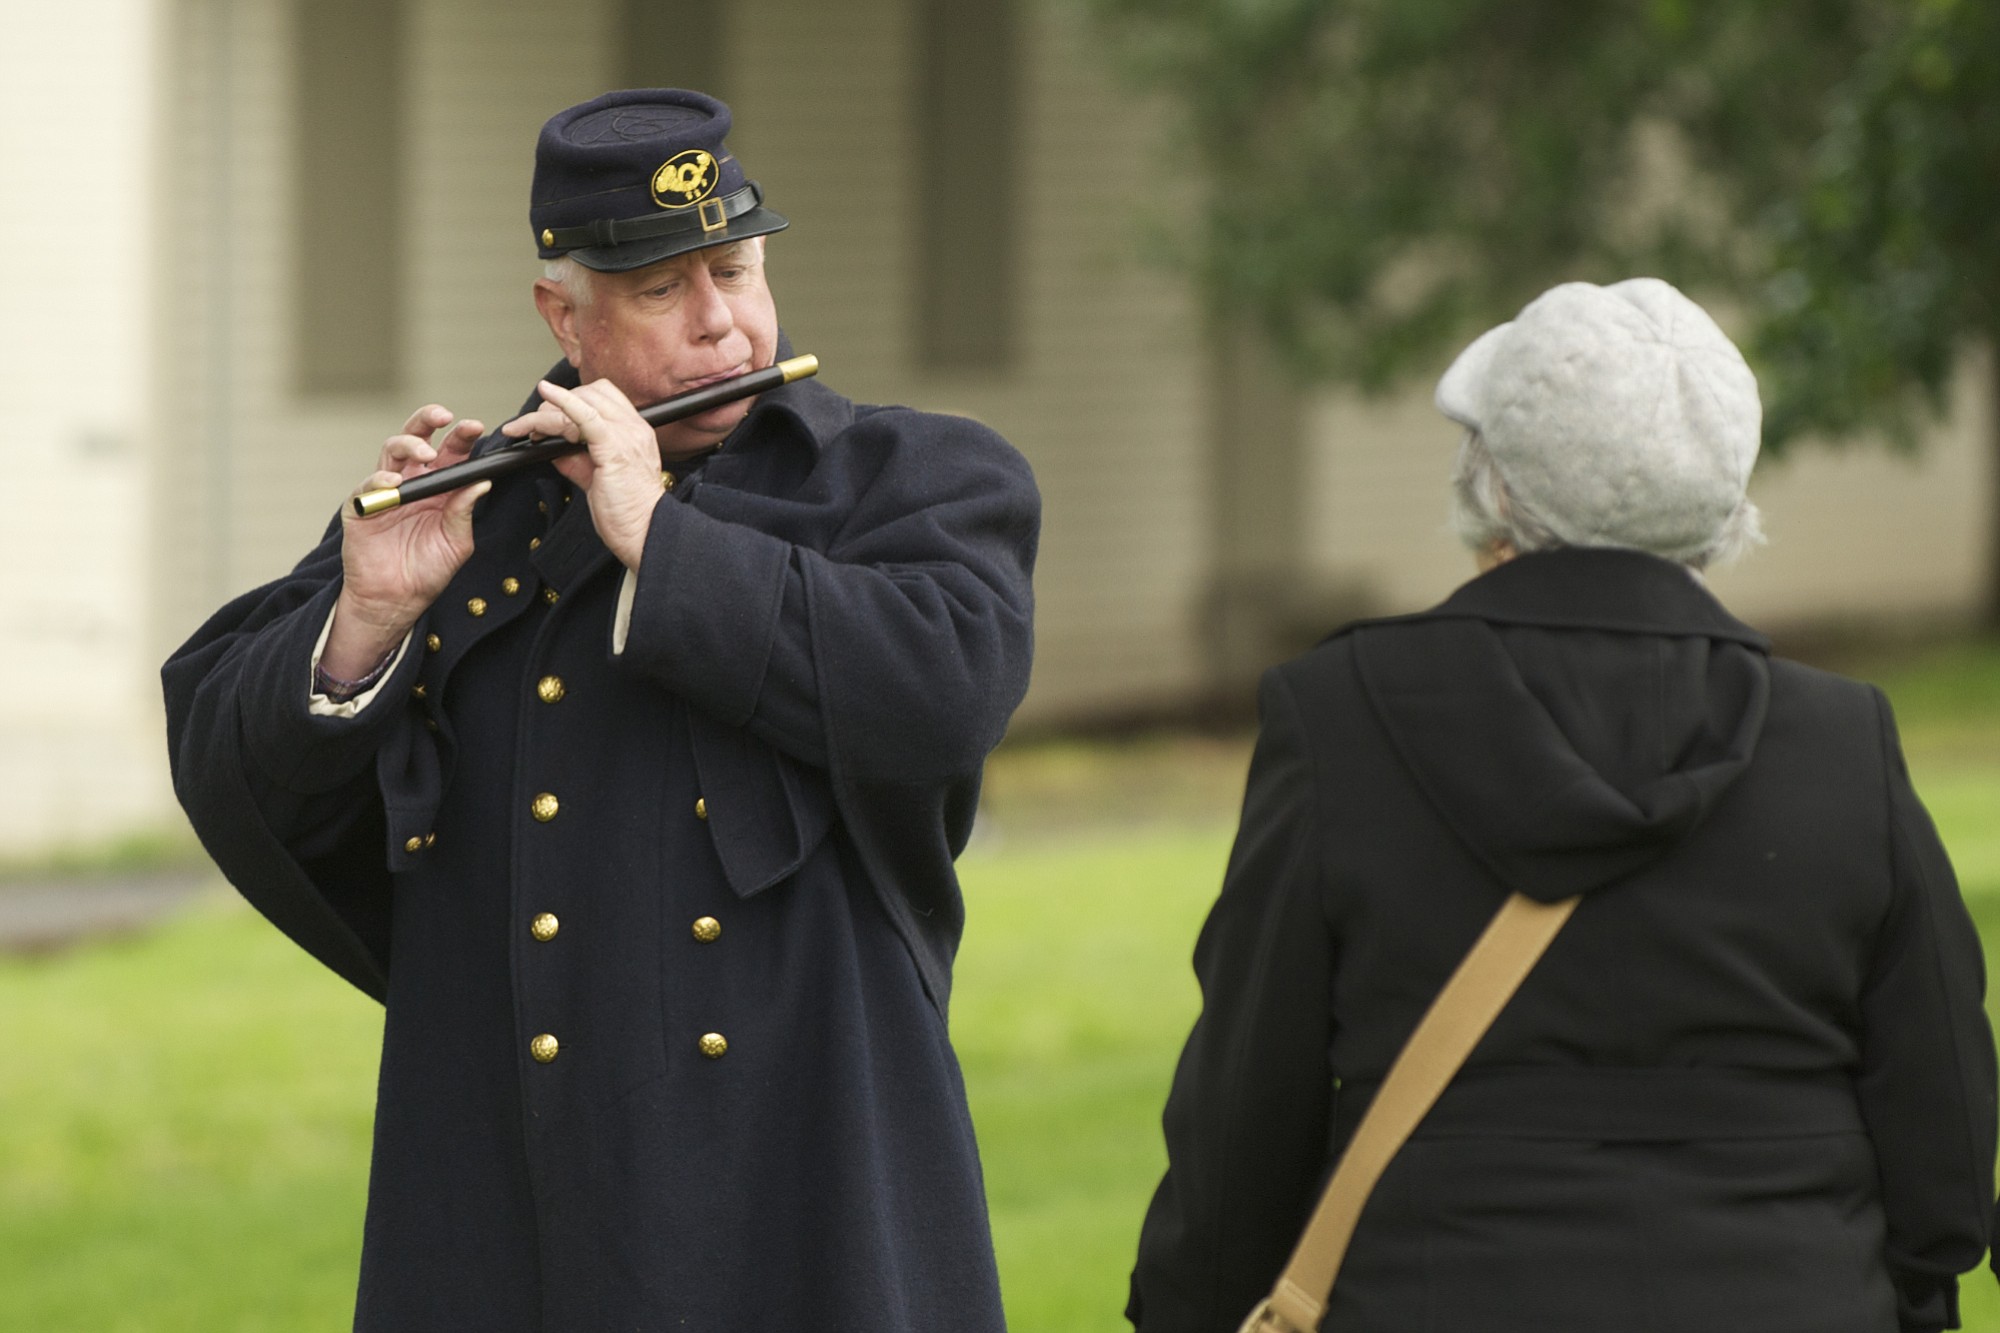 1st Oregon Volunteer Infantry reenactor Mitch Rice plays the fife for visitors during a soldiers bivouac demonstration at the Vancouver Barracks, Monday, May 27, 2013.